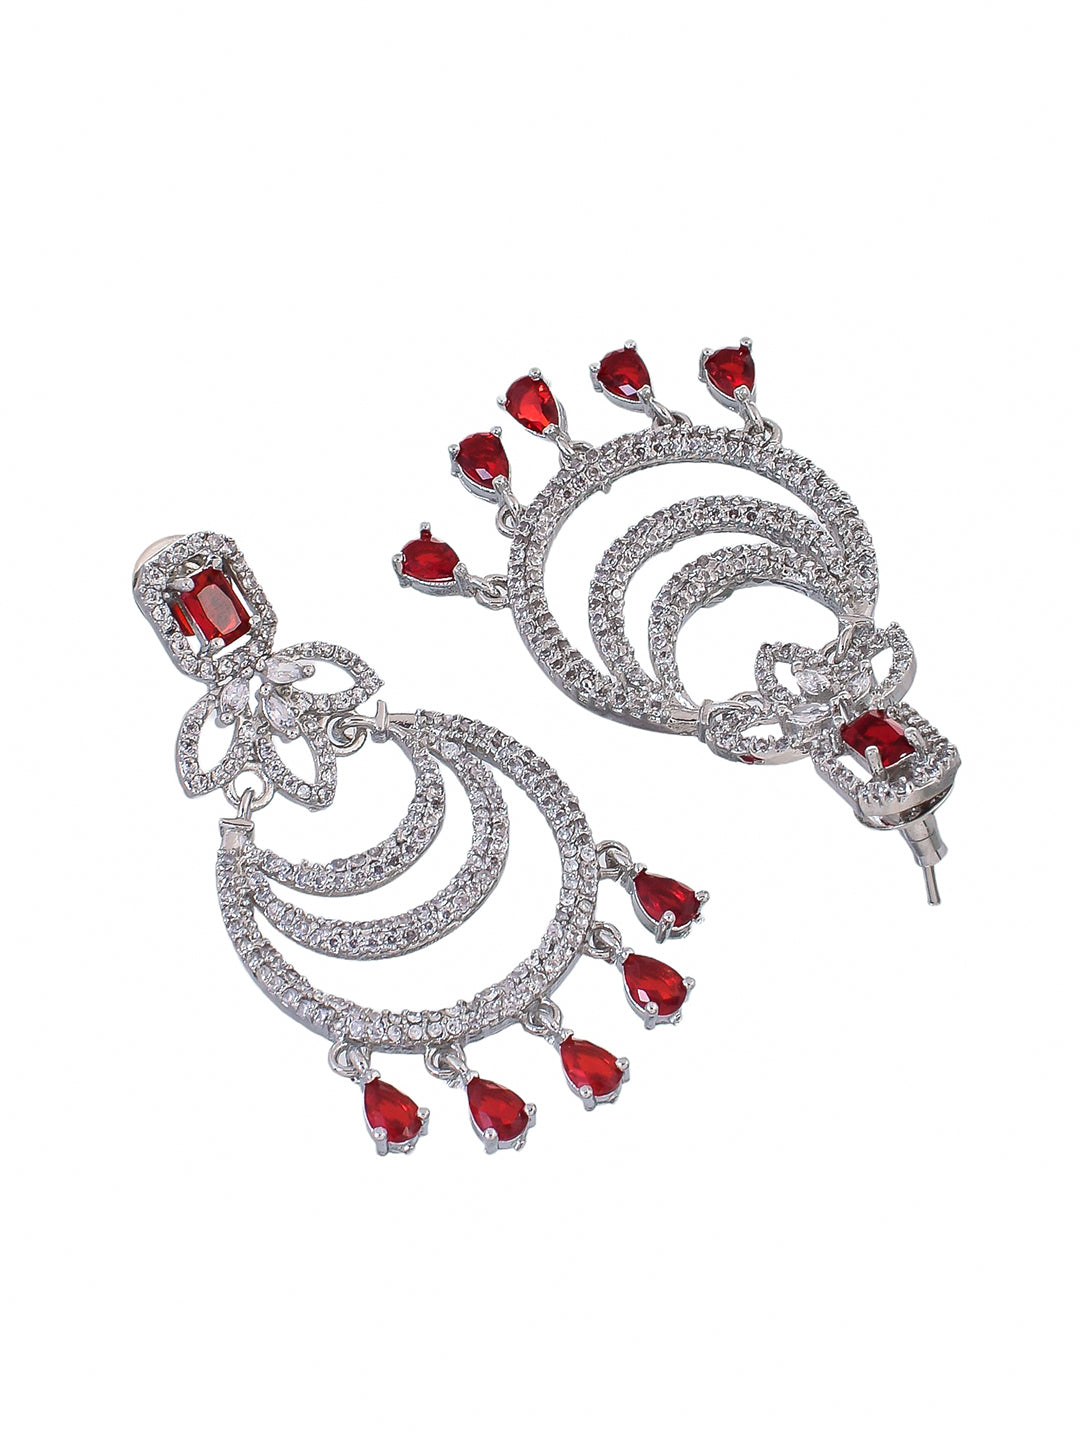 beautiful Silver Plated American Diamond Classic long earrings for women and girls. Made with precision and sophistication, these earrings add a touch of elegance to any outfit.